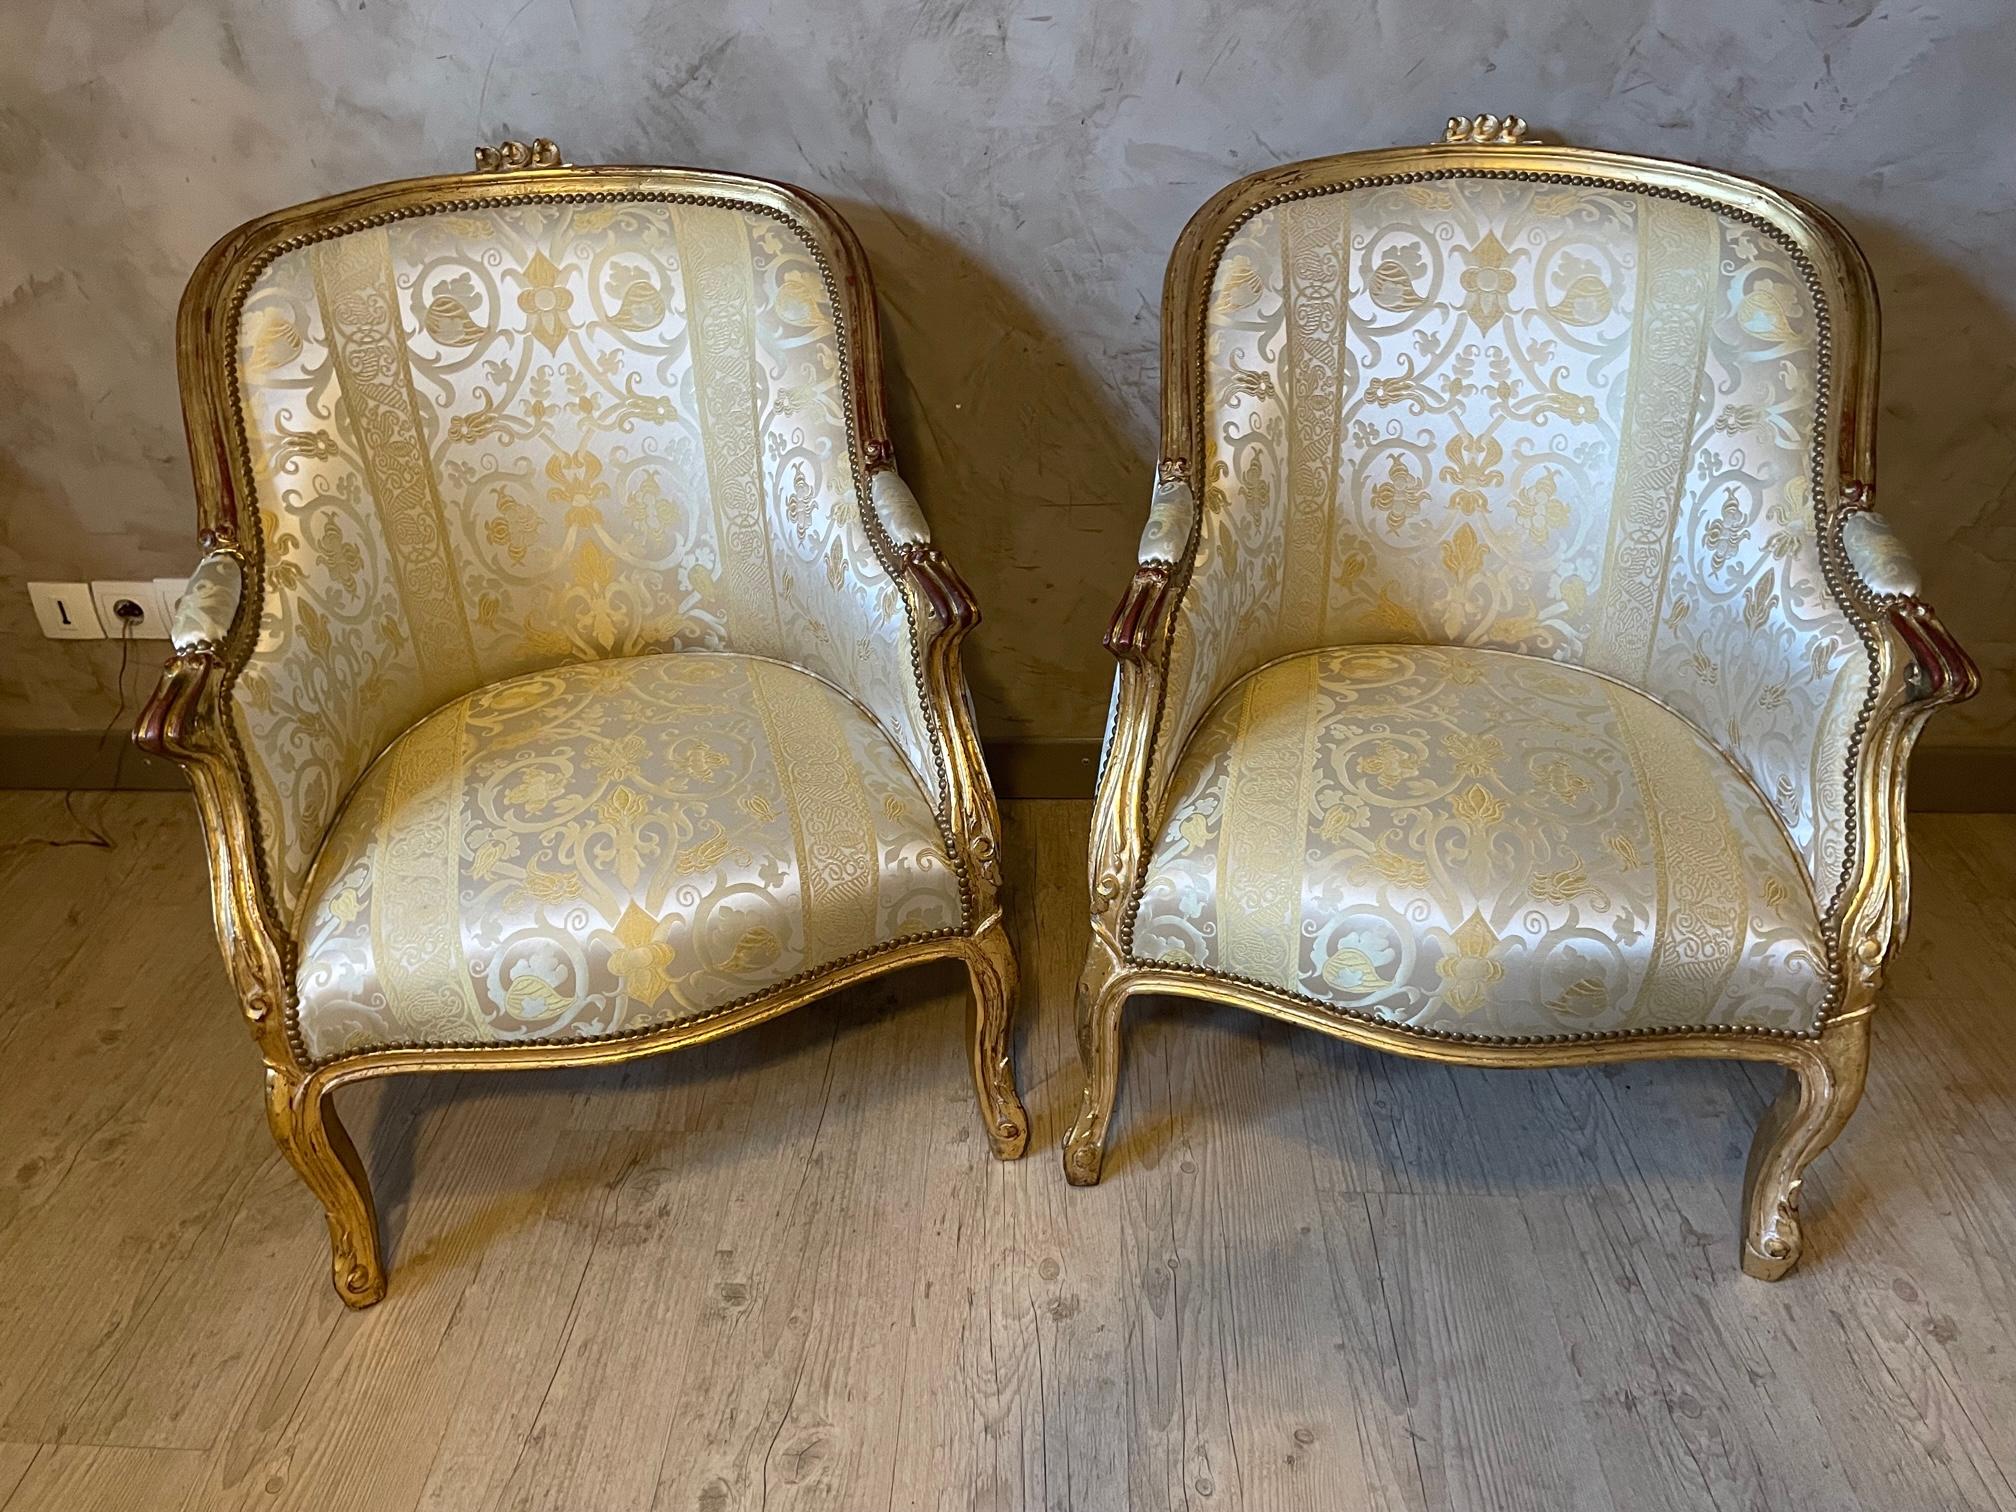 Very nice Bergere armchair in the Louis XV style. Beautiful yellow silk fabric in very good condition. The wood is golden painted. 
Very confortable armchairs and good condition.